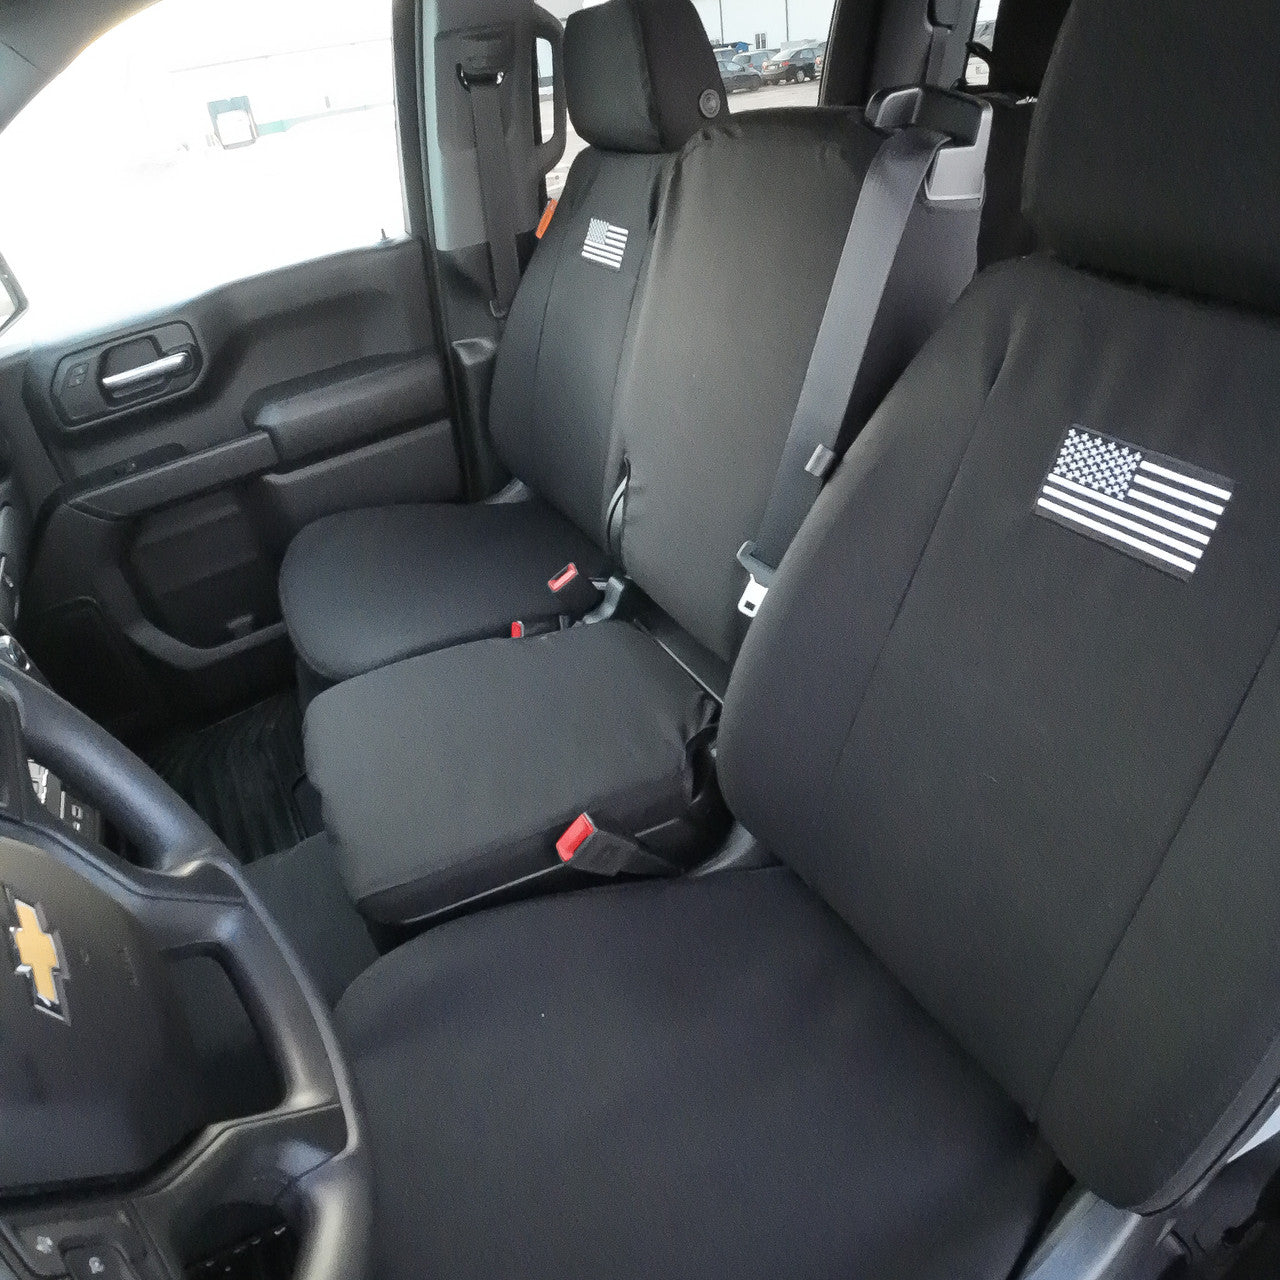 Front Seat of a 2019 Chevy Silverado 1500 with Black TigerTough Seat Covers